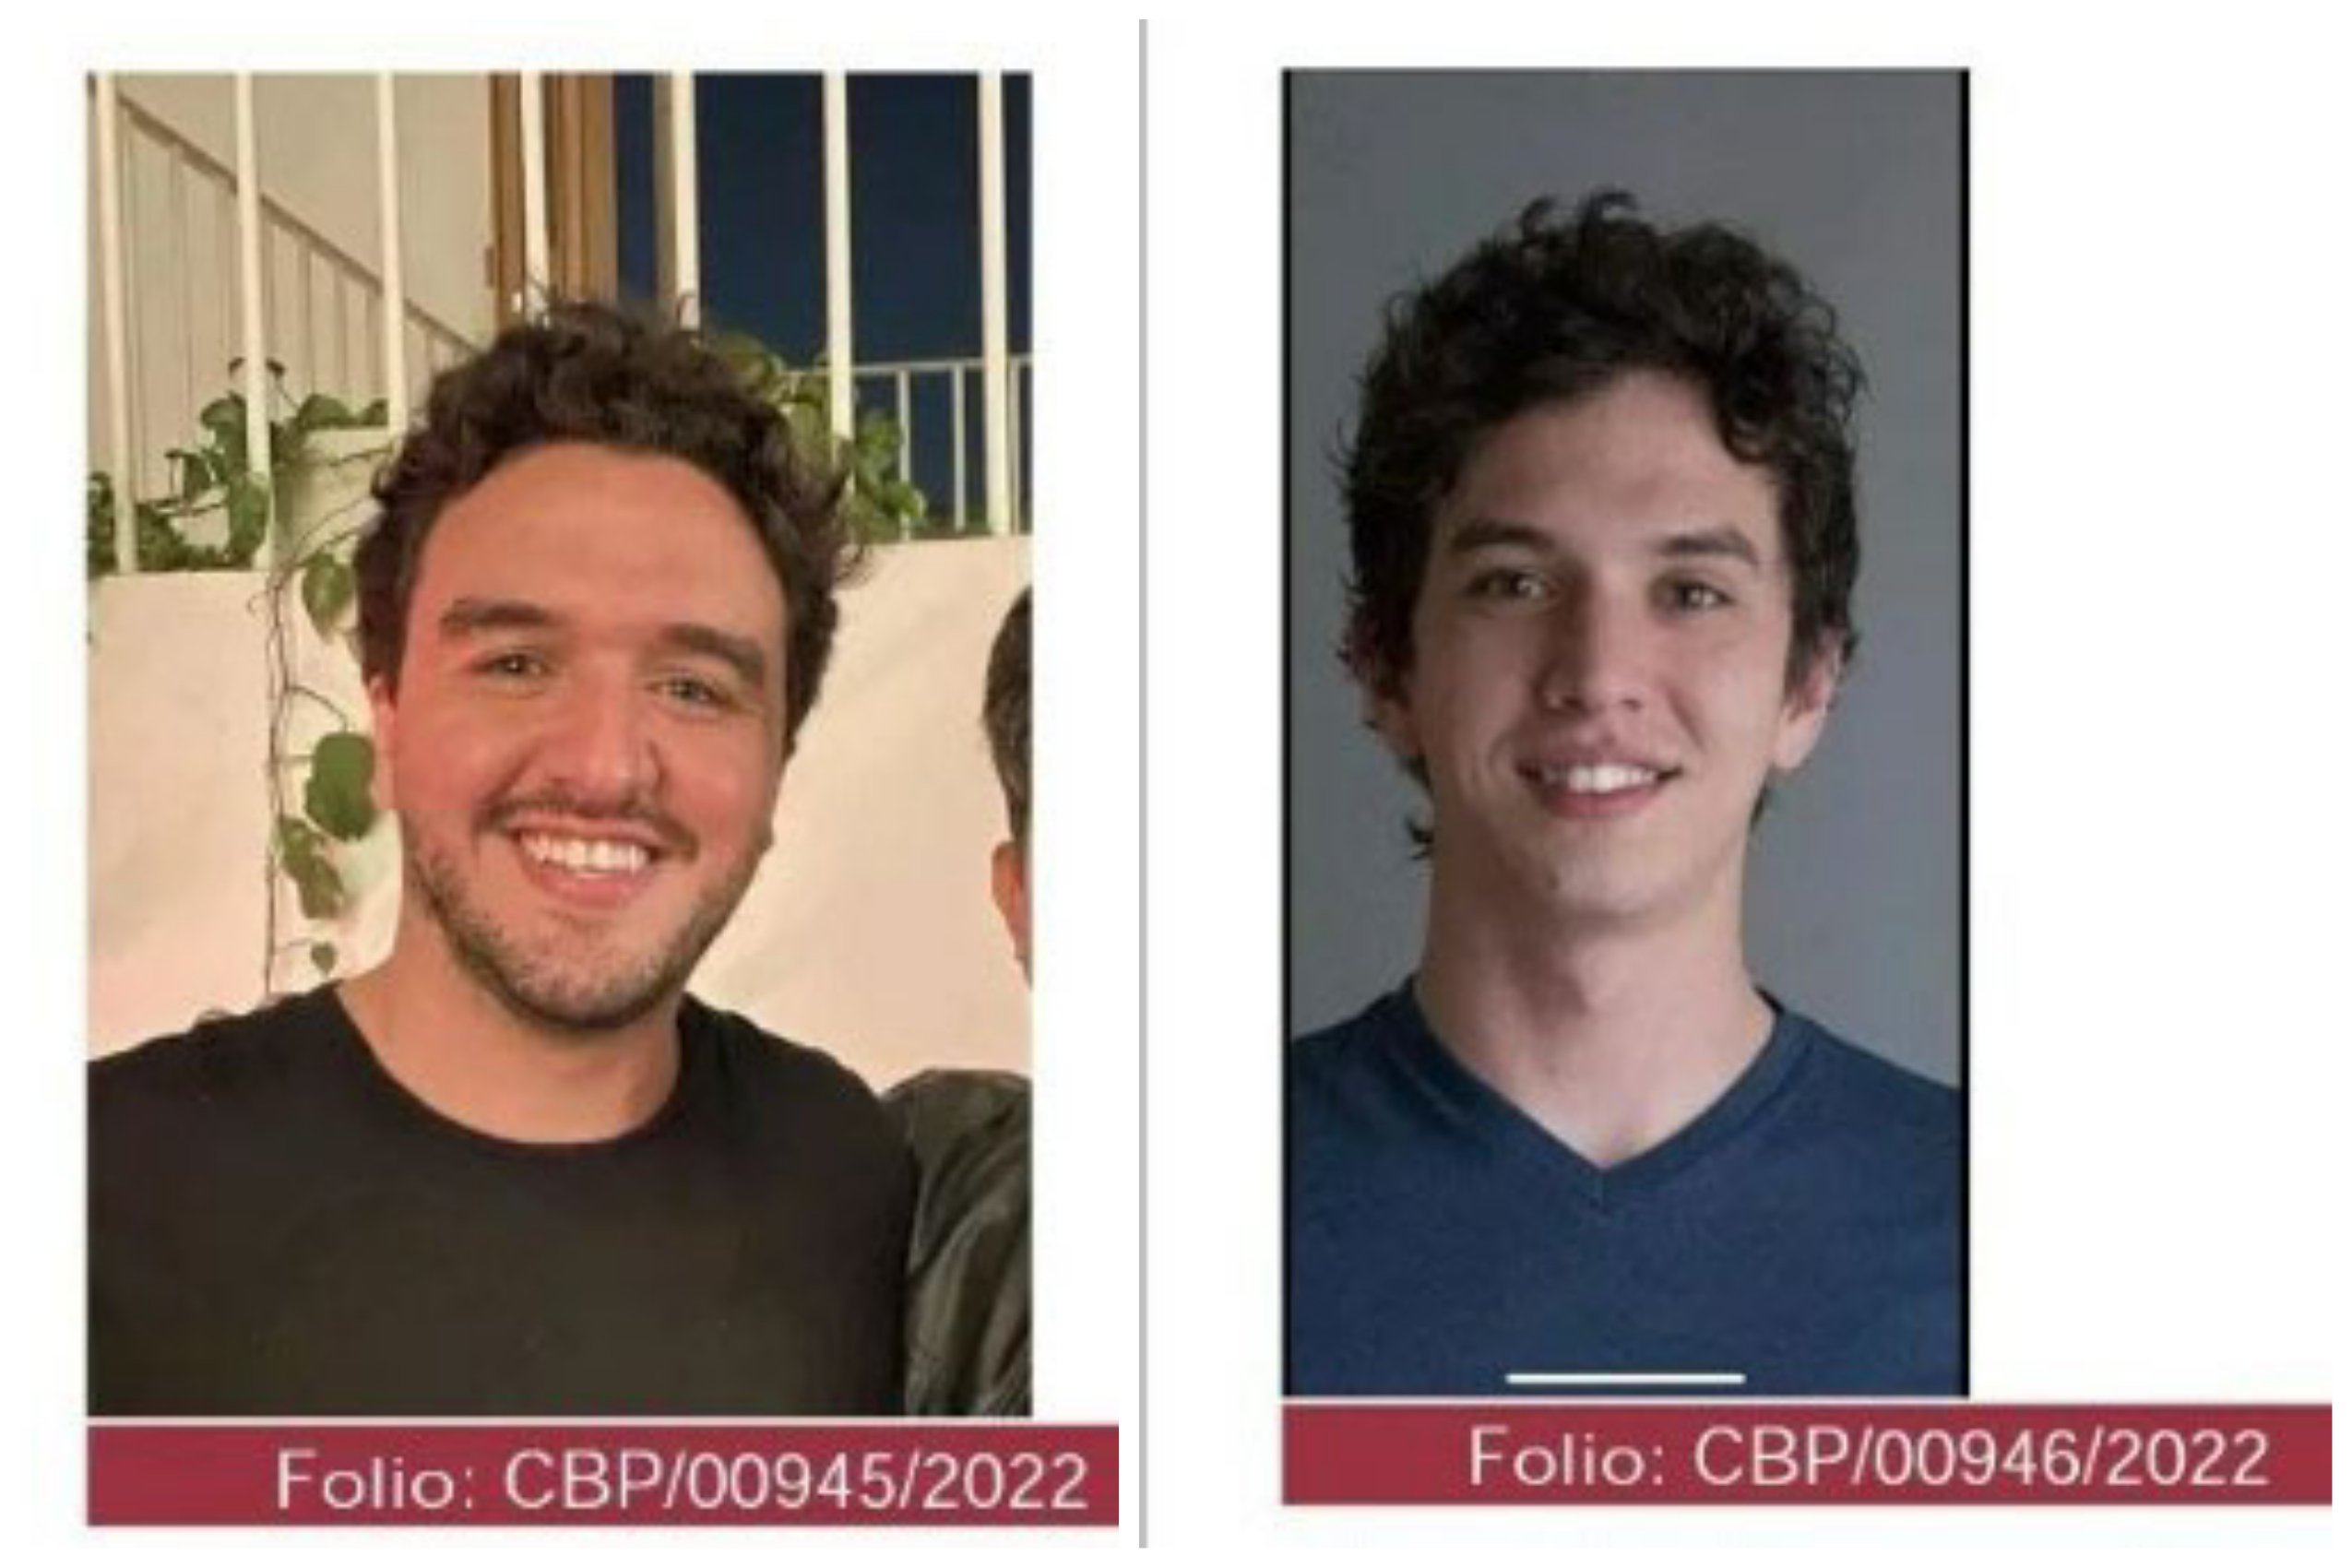 They report the disappearance of the Tirado brothers in the CDMX